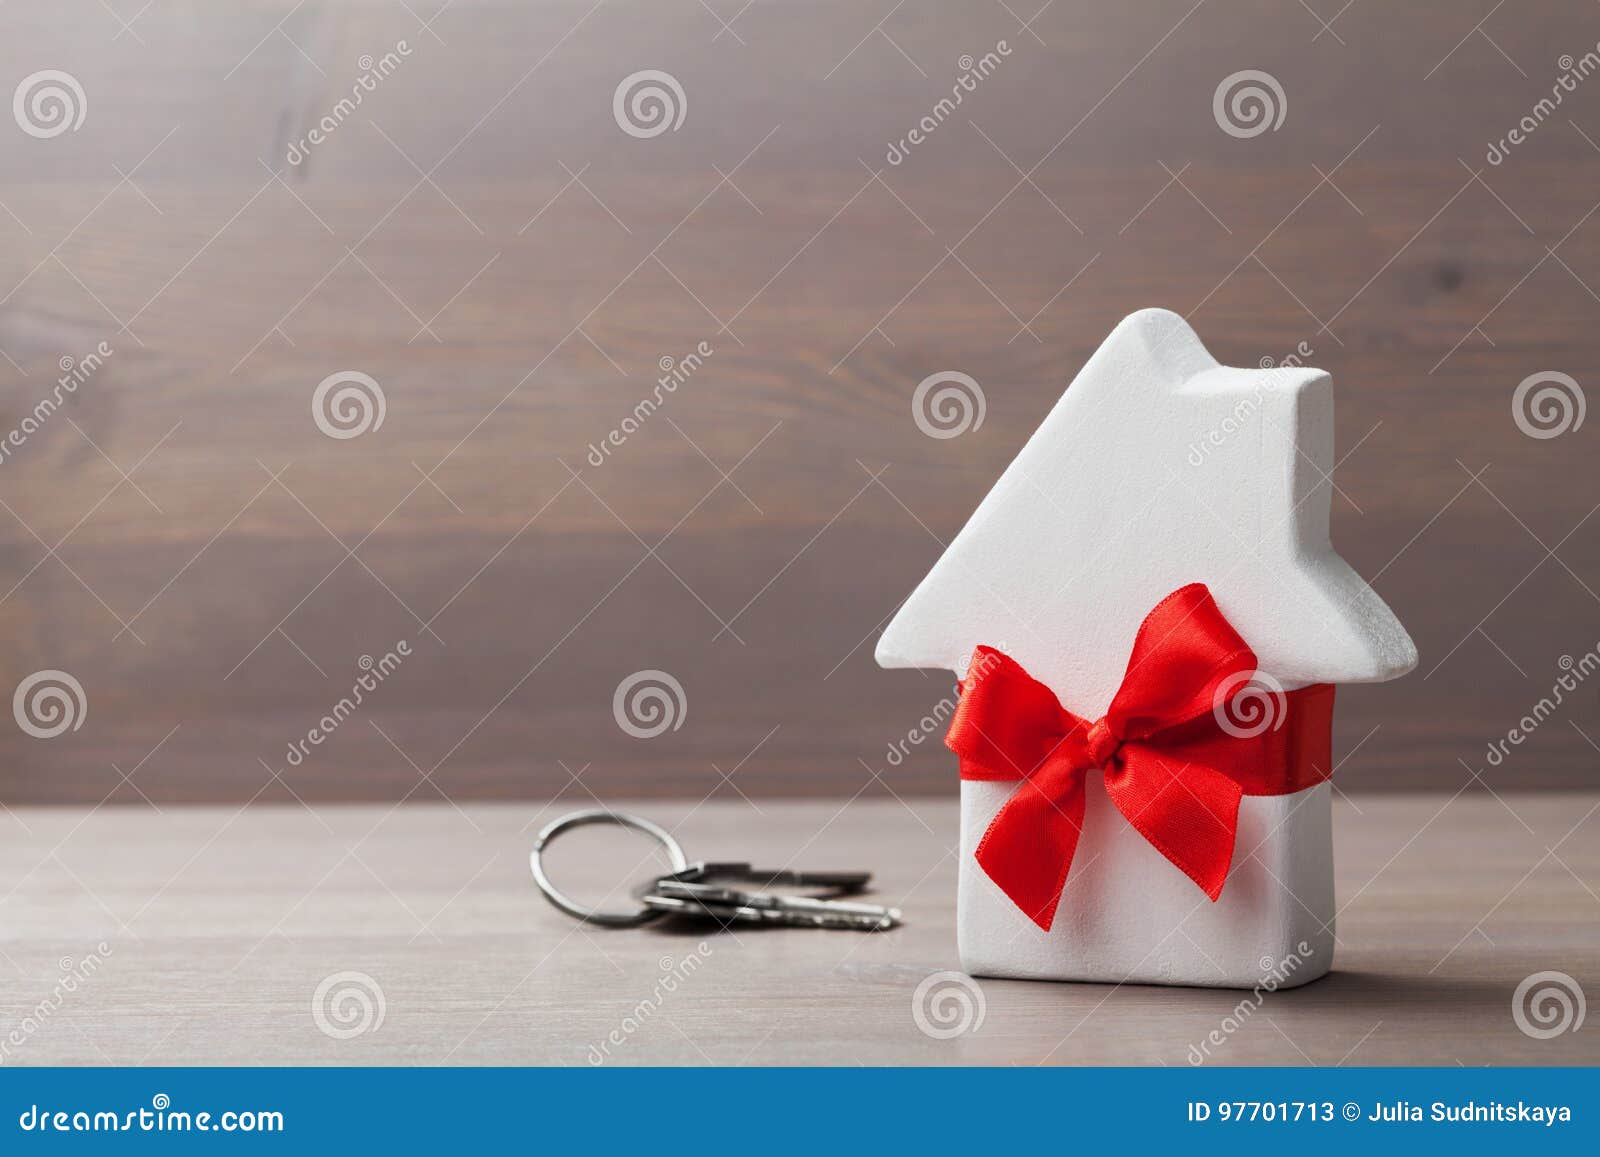 small white house decorated red bow ribbon with bunch of keys on wooden background. gift, real estate or buying a new home